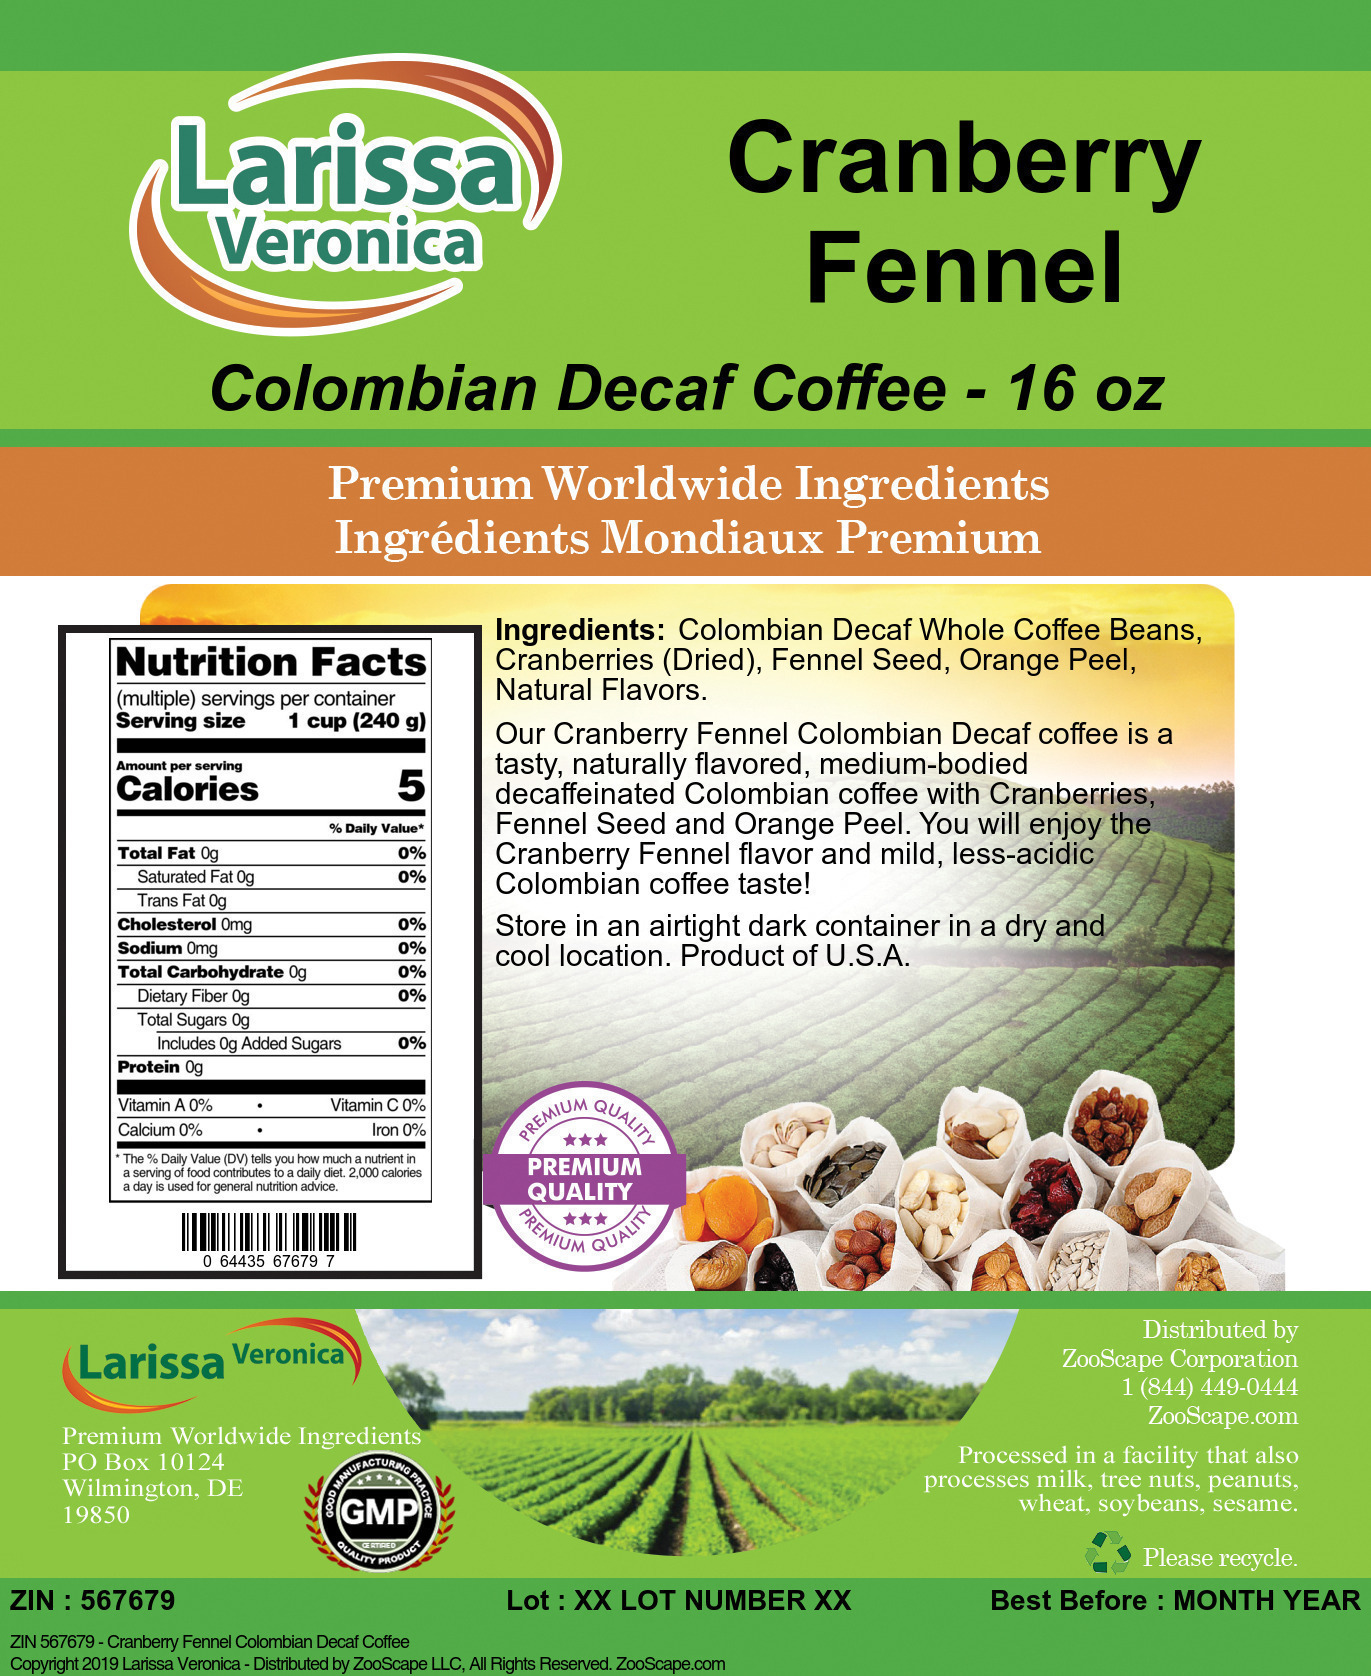 Cranberry Fennel Colombian Decaf Coffee - Label